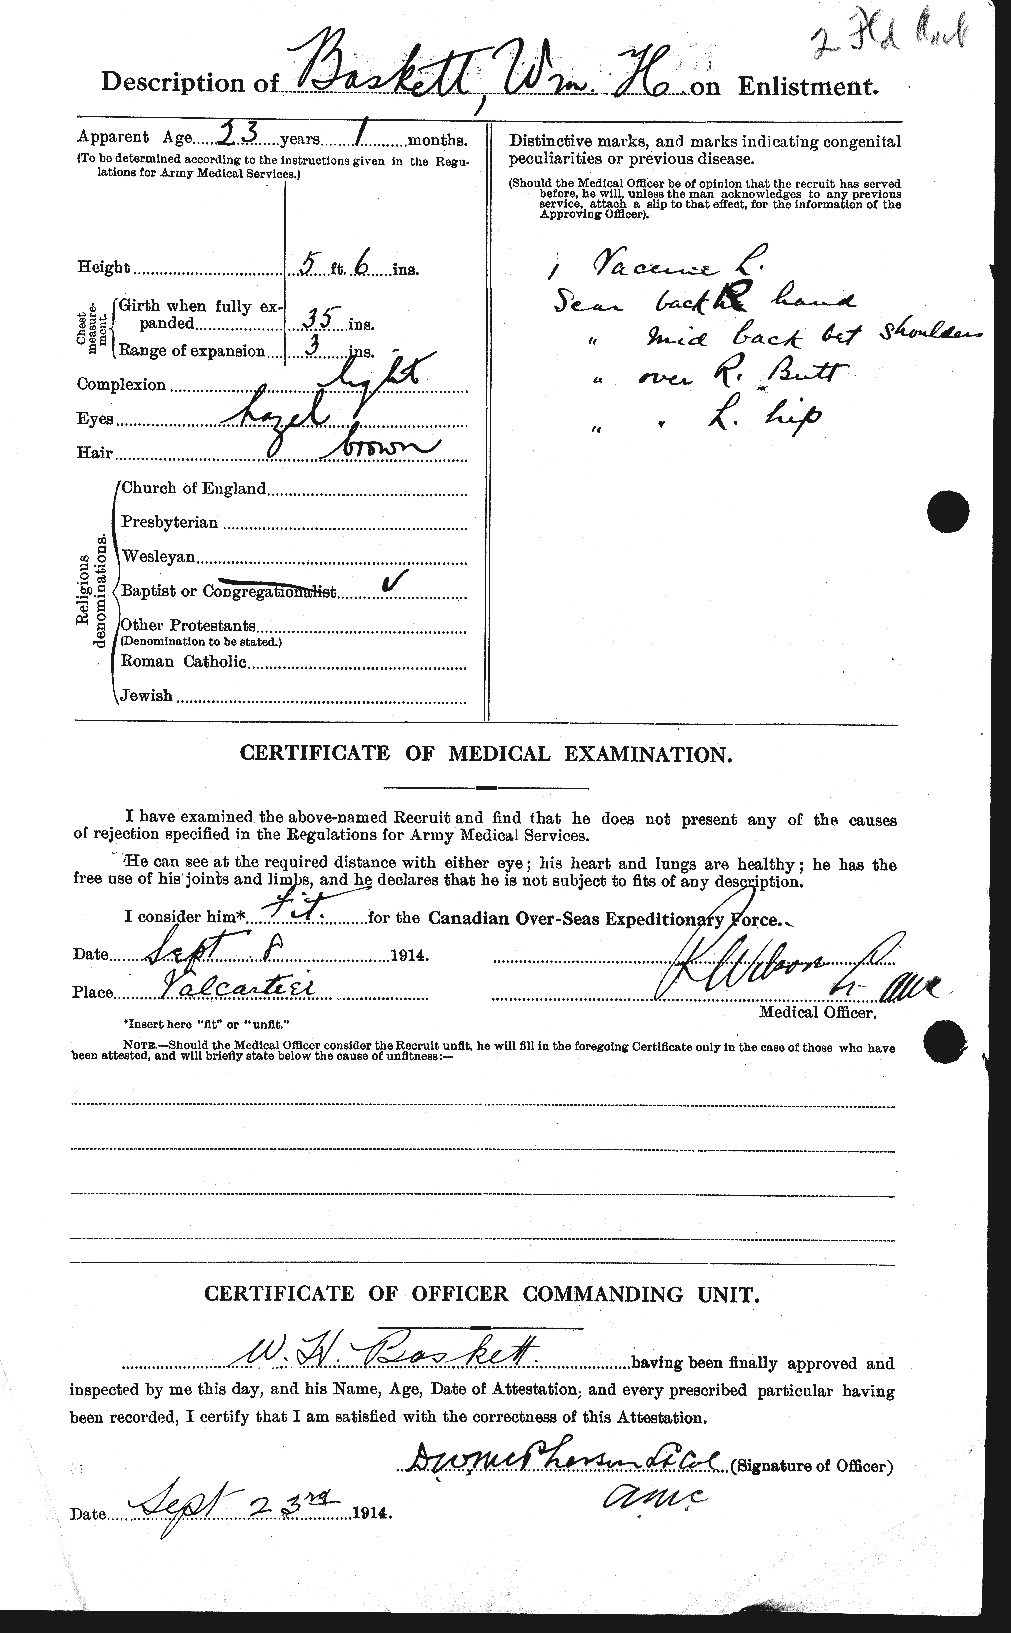 Personnel Records of the First World War - CEF 221174b